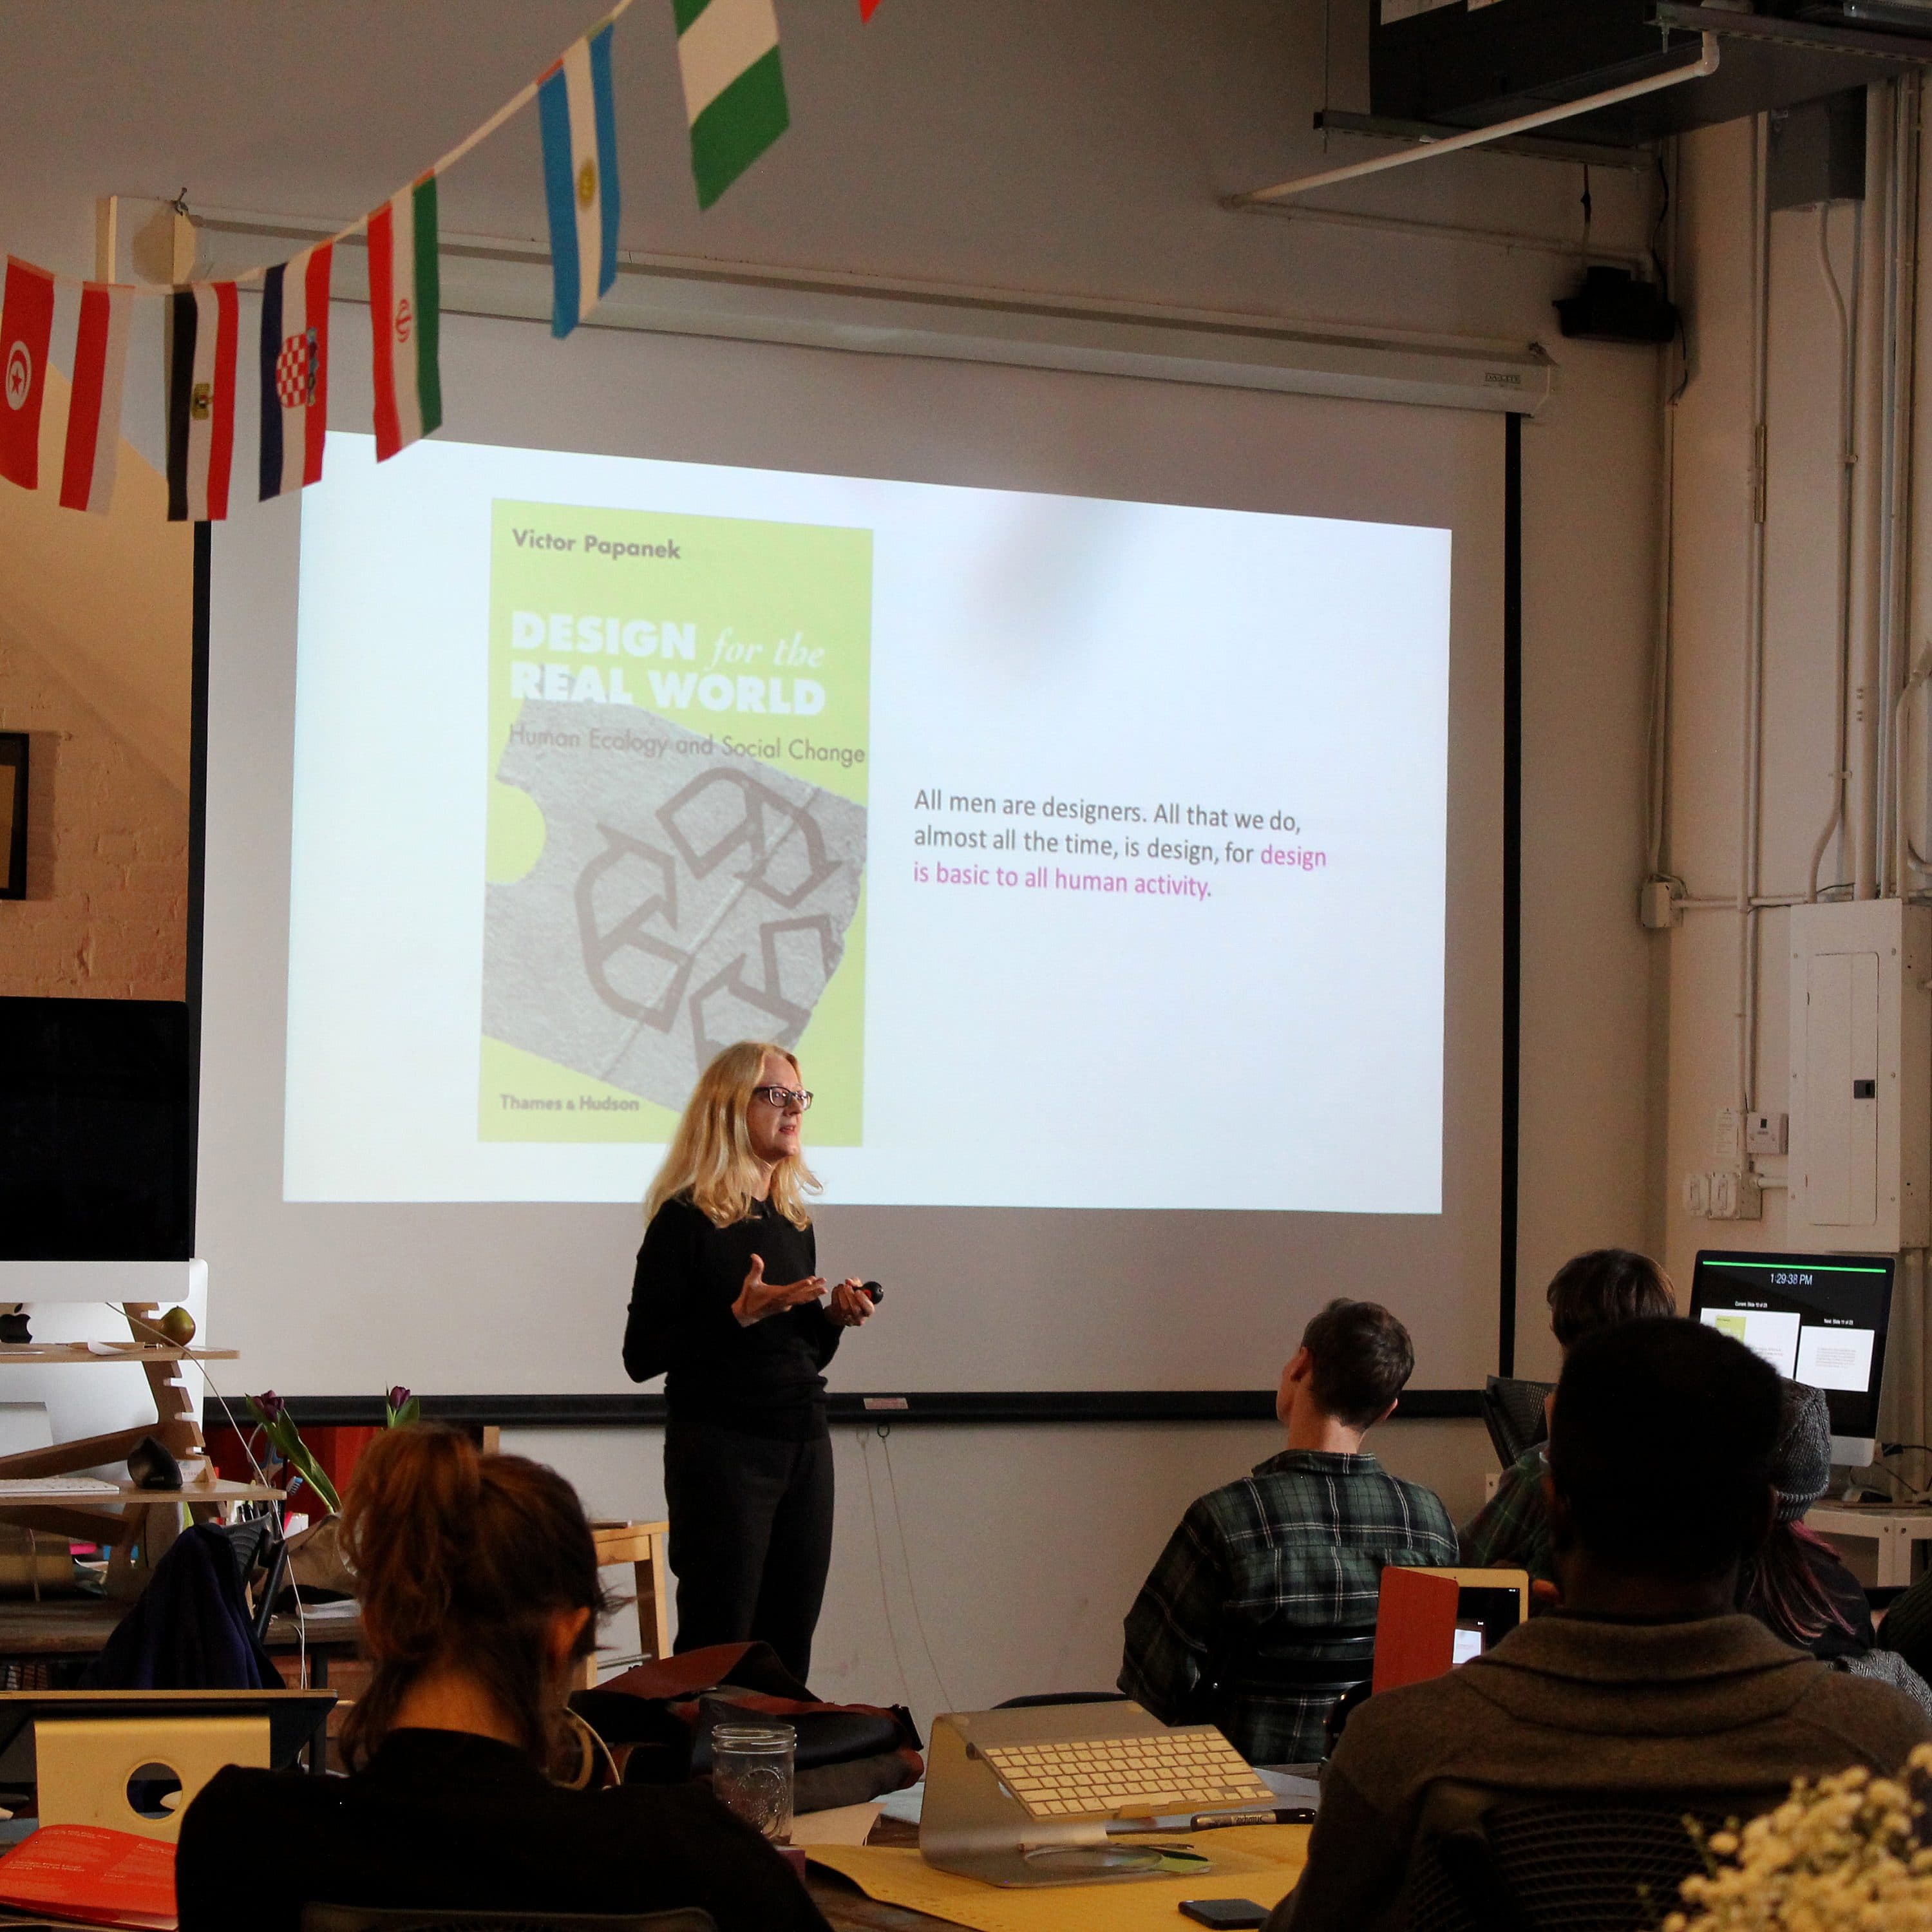 A woman stands in front of a classroom, presenting a slideshow titled "DESIGN for the REAL WORLD" by Victor Papanek. Students are seated, listening attentively. The room is decorated with international flags hanging from the ceiling and various artworks on the walls.